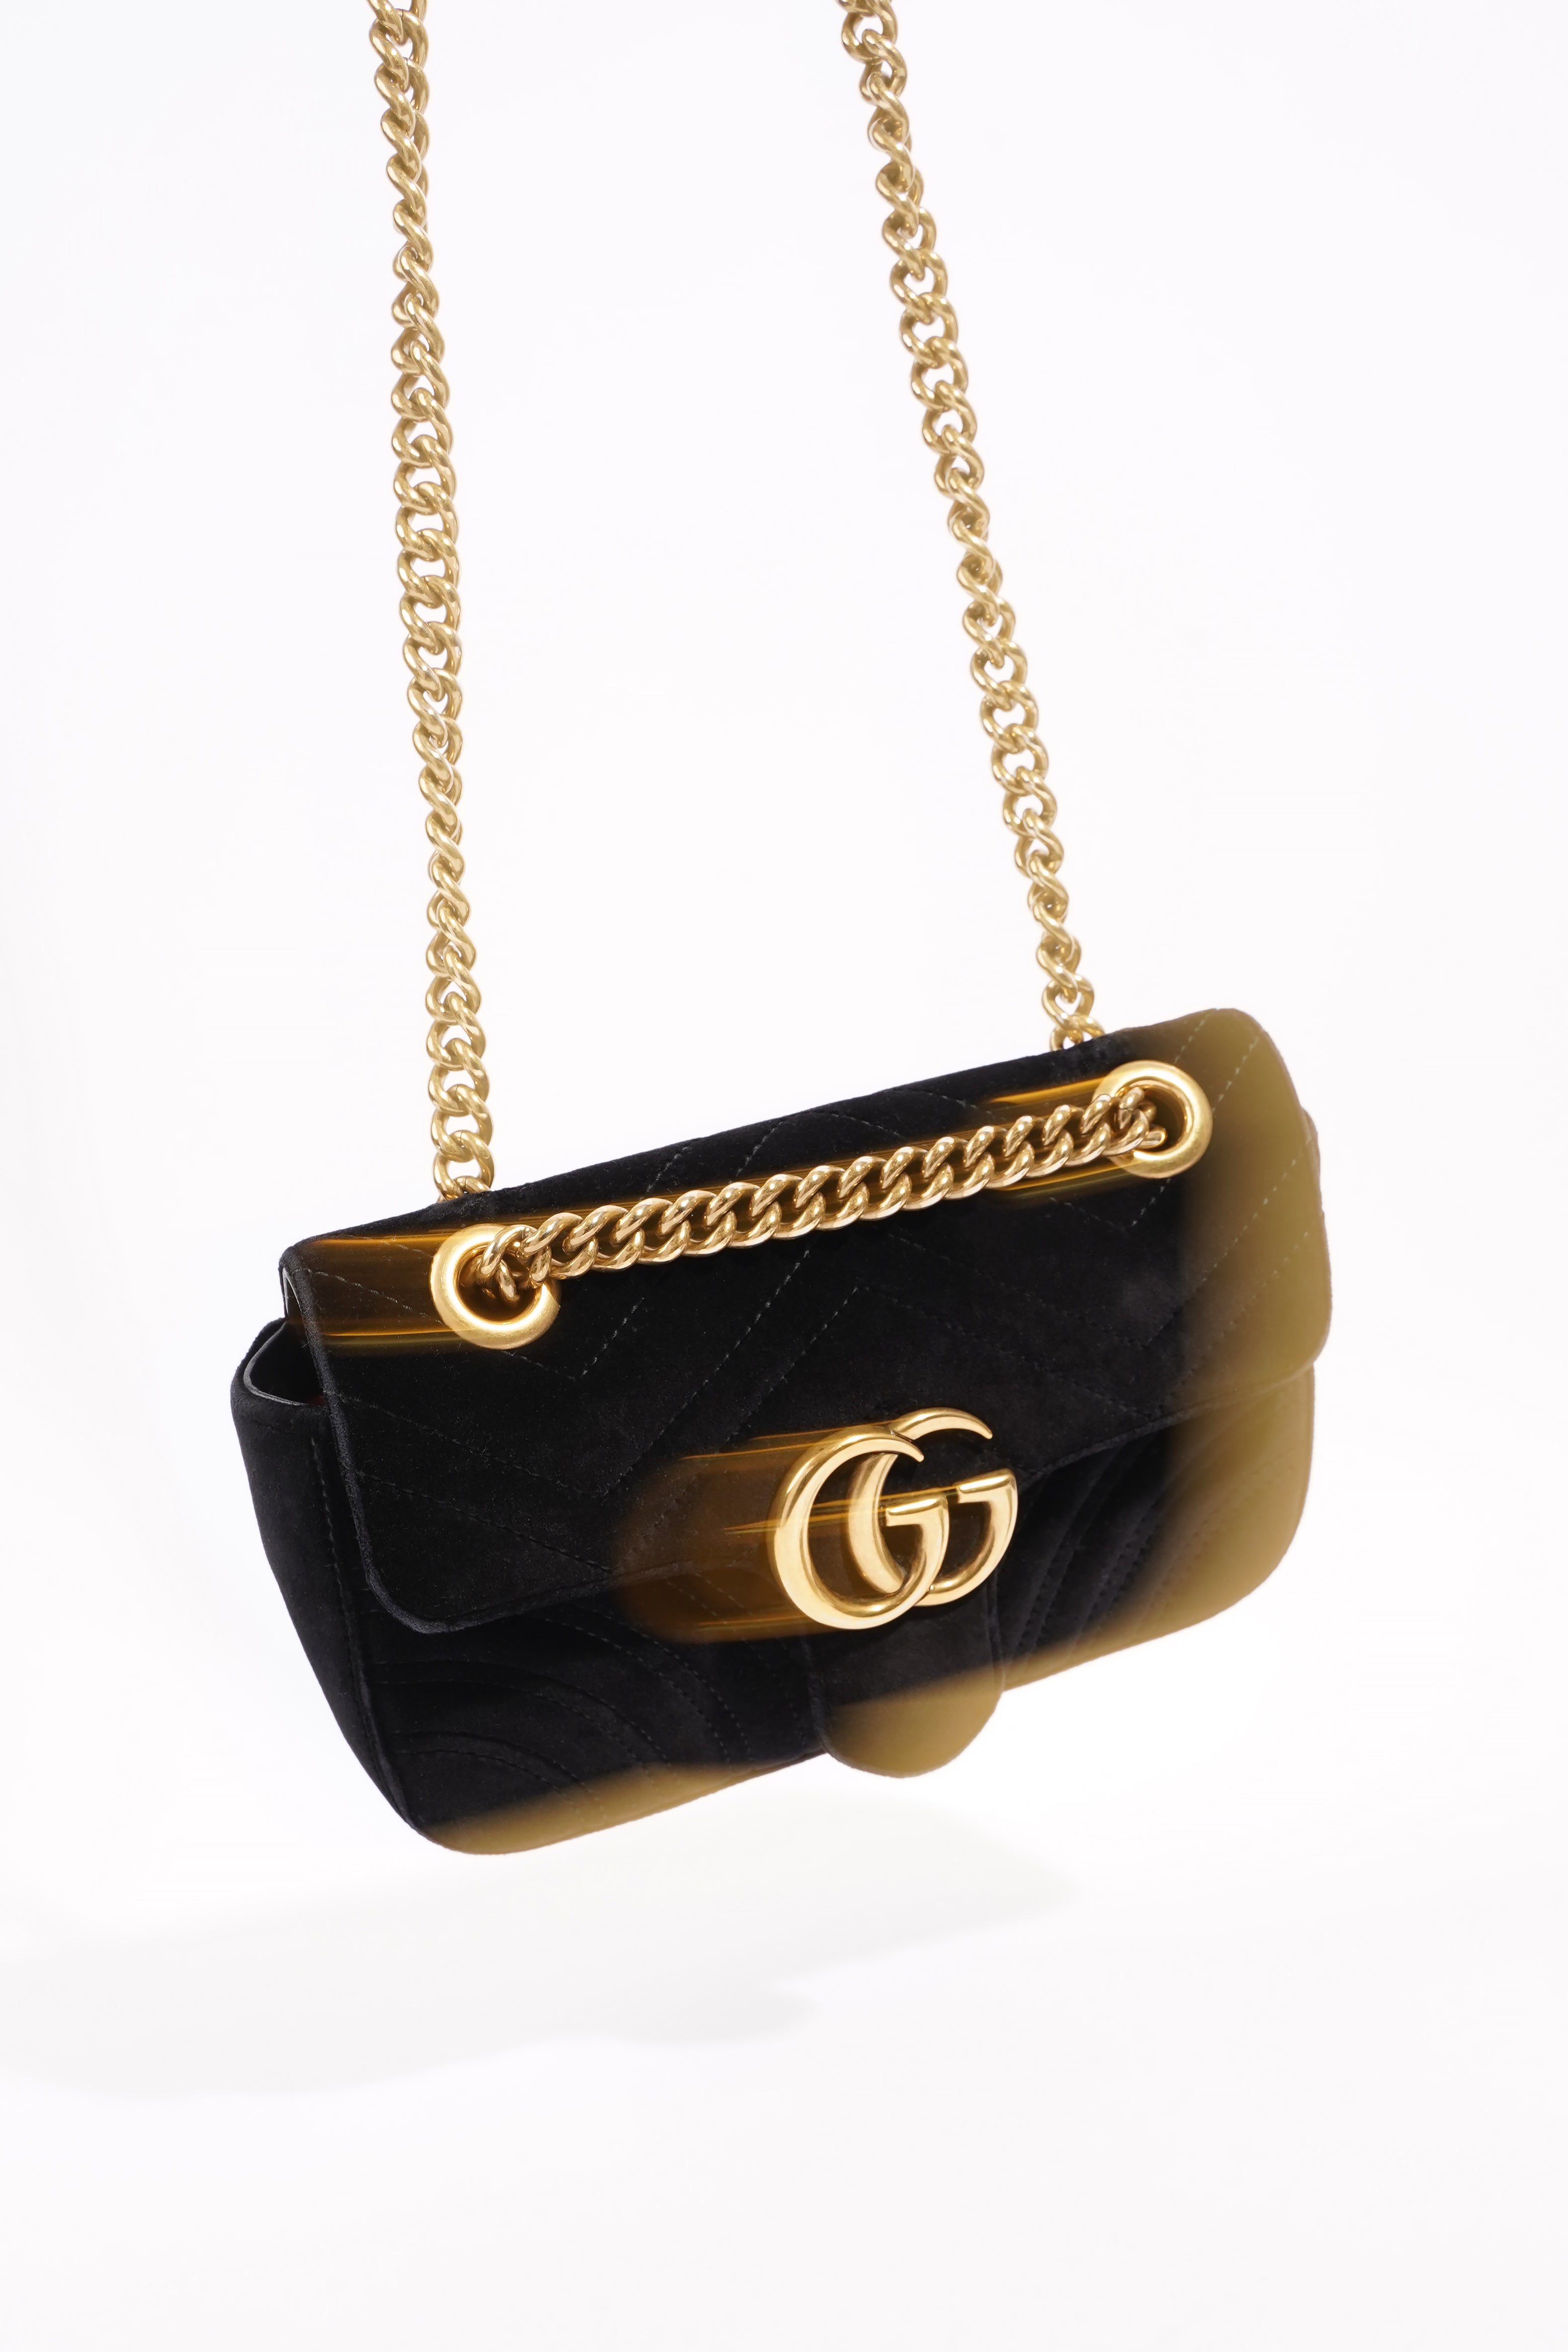 Gucci Cross Body Bag Best Price In Pakistan | Rs 4500 | find the best  quality of Handbags,hand Bag, Hand Bags, Ladies Bags, Side Bags, Clutches,  Leather Bags, Purse, Fashion Bags, Tote